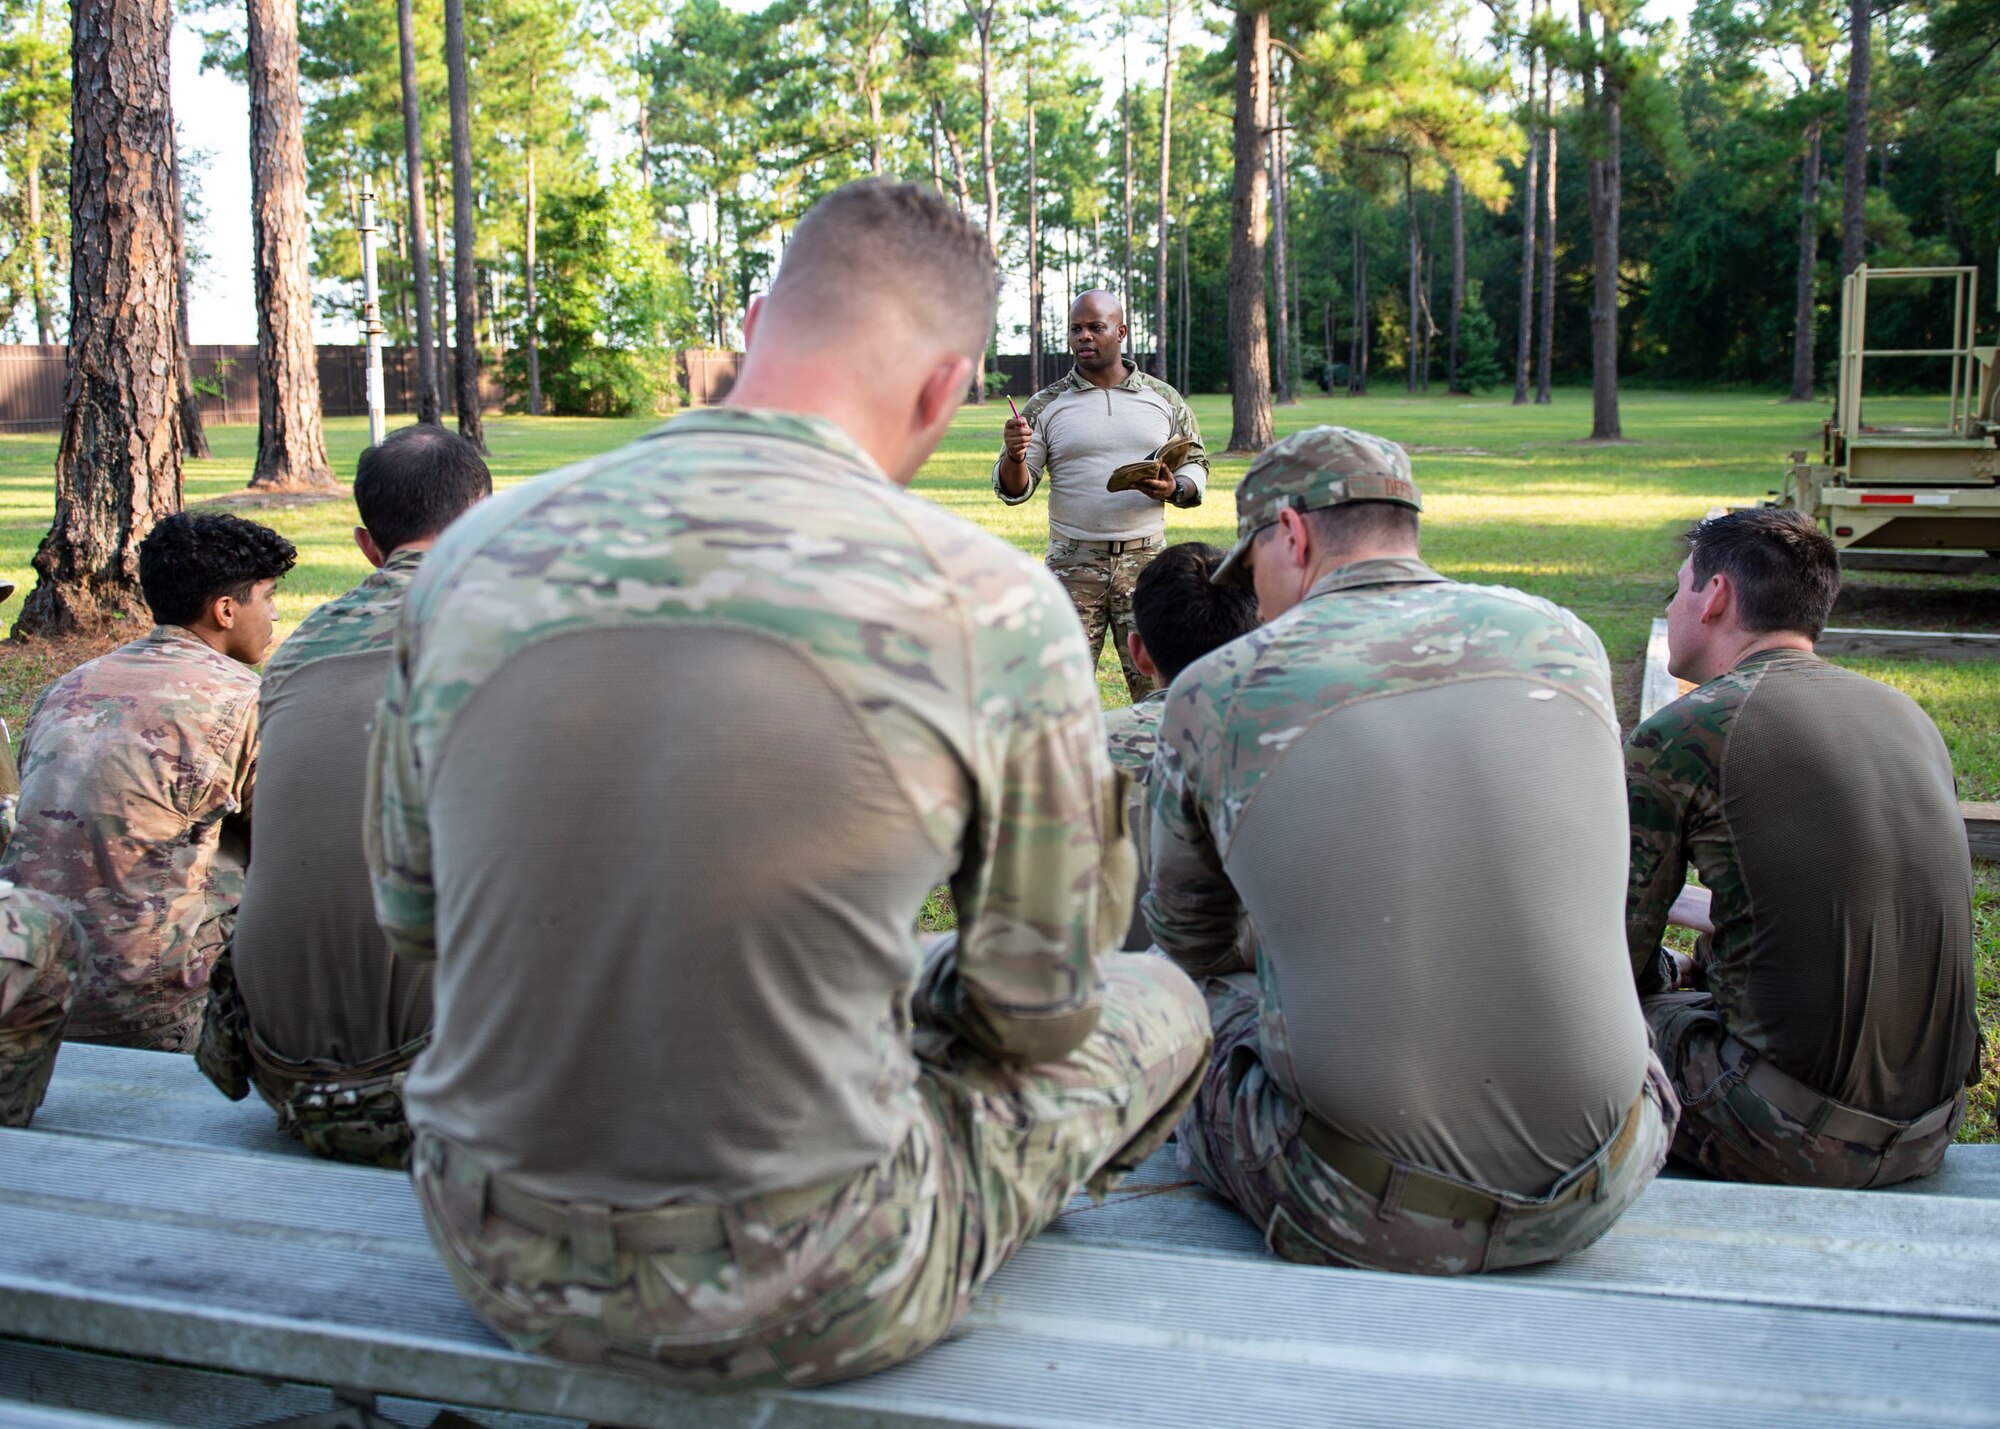 Tech. Sgt. Justin Amburgey, 824th Base Defense Squadron squad leader briefs Airmen on the training plan during the Tactical Leaders Course, Aug. 10, 2019, at Moody Air Force Base, Ga. The 7-day course revolved around squad leaders developing their skills to effectively communicate, team build and mission plan. These skills were assessed during a 36-hour simulated operation where squad leaders lead Airmen through tactical situations. (U.S. Air Force photo by Airman Azaria E. Foster)